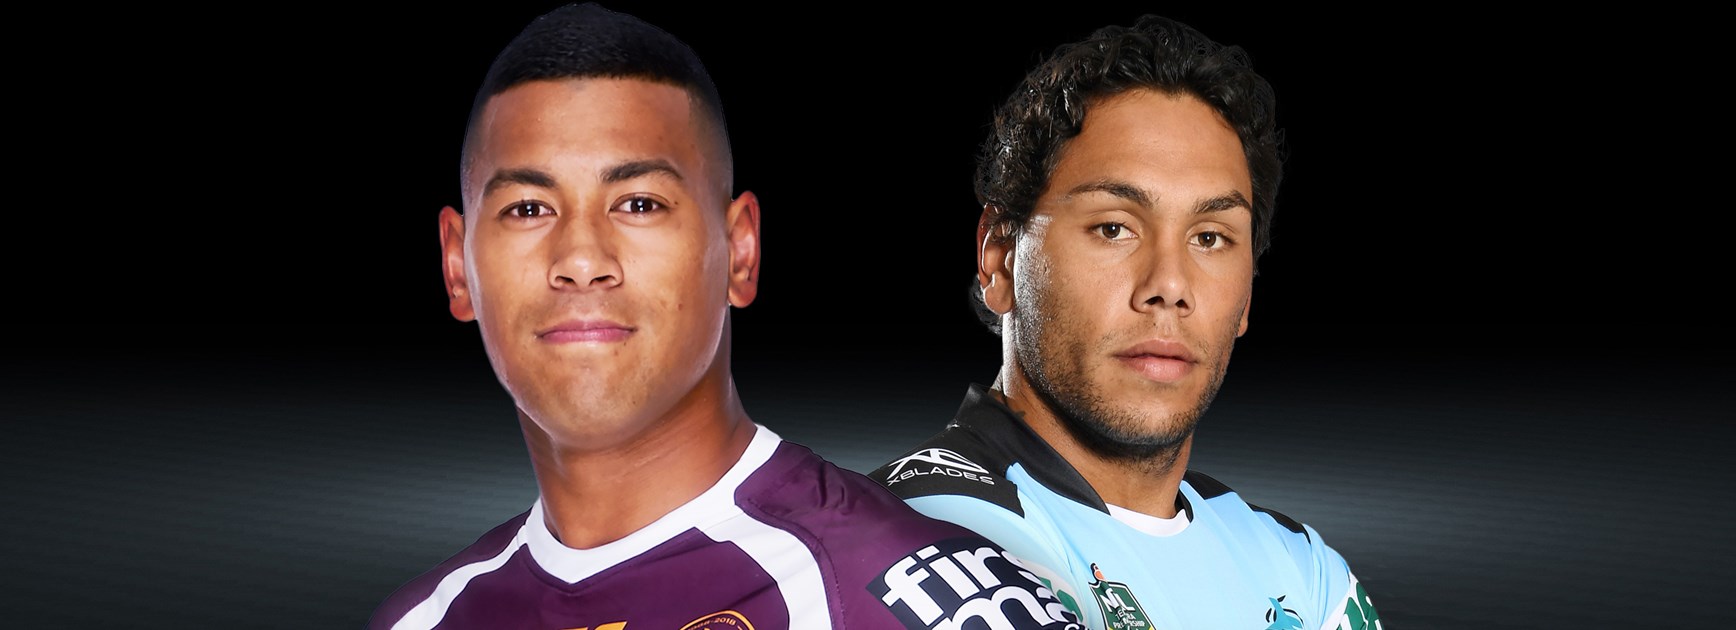 NRL rookie of the year: NRL.com experts have their say